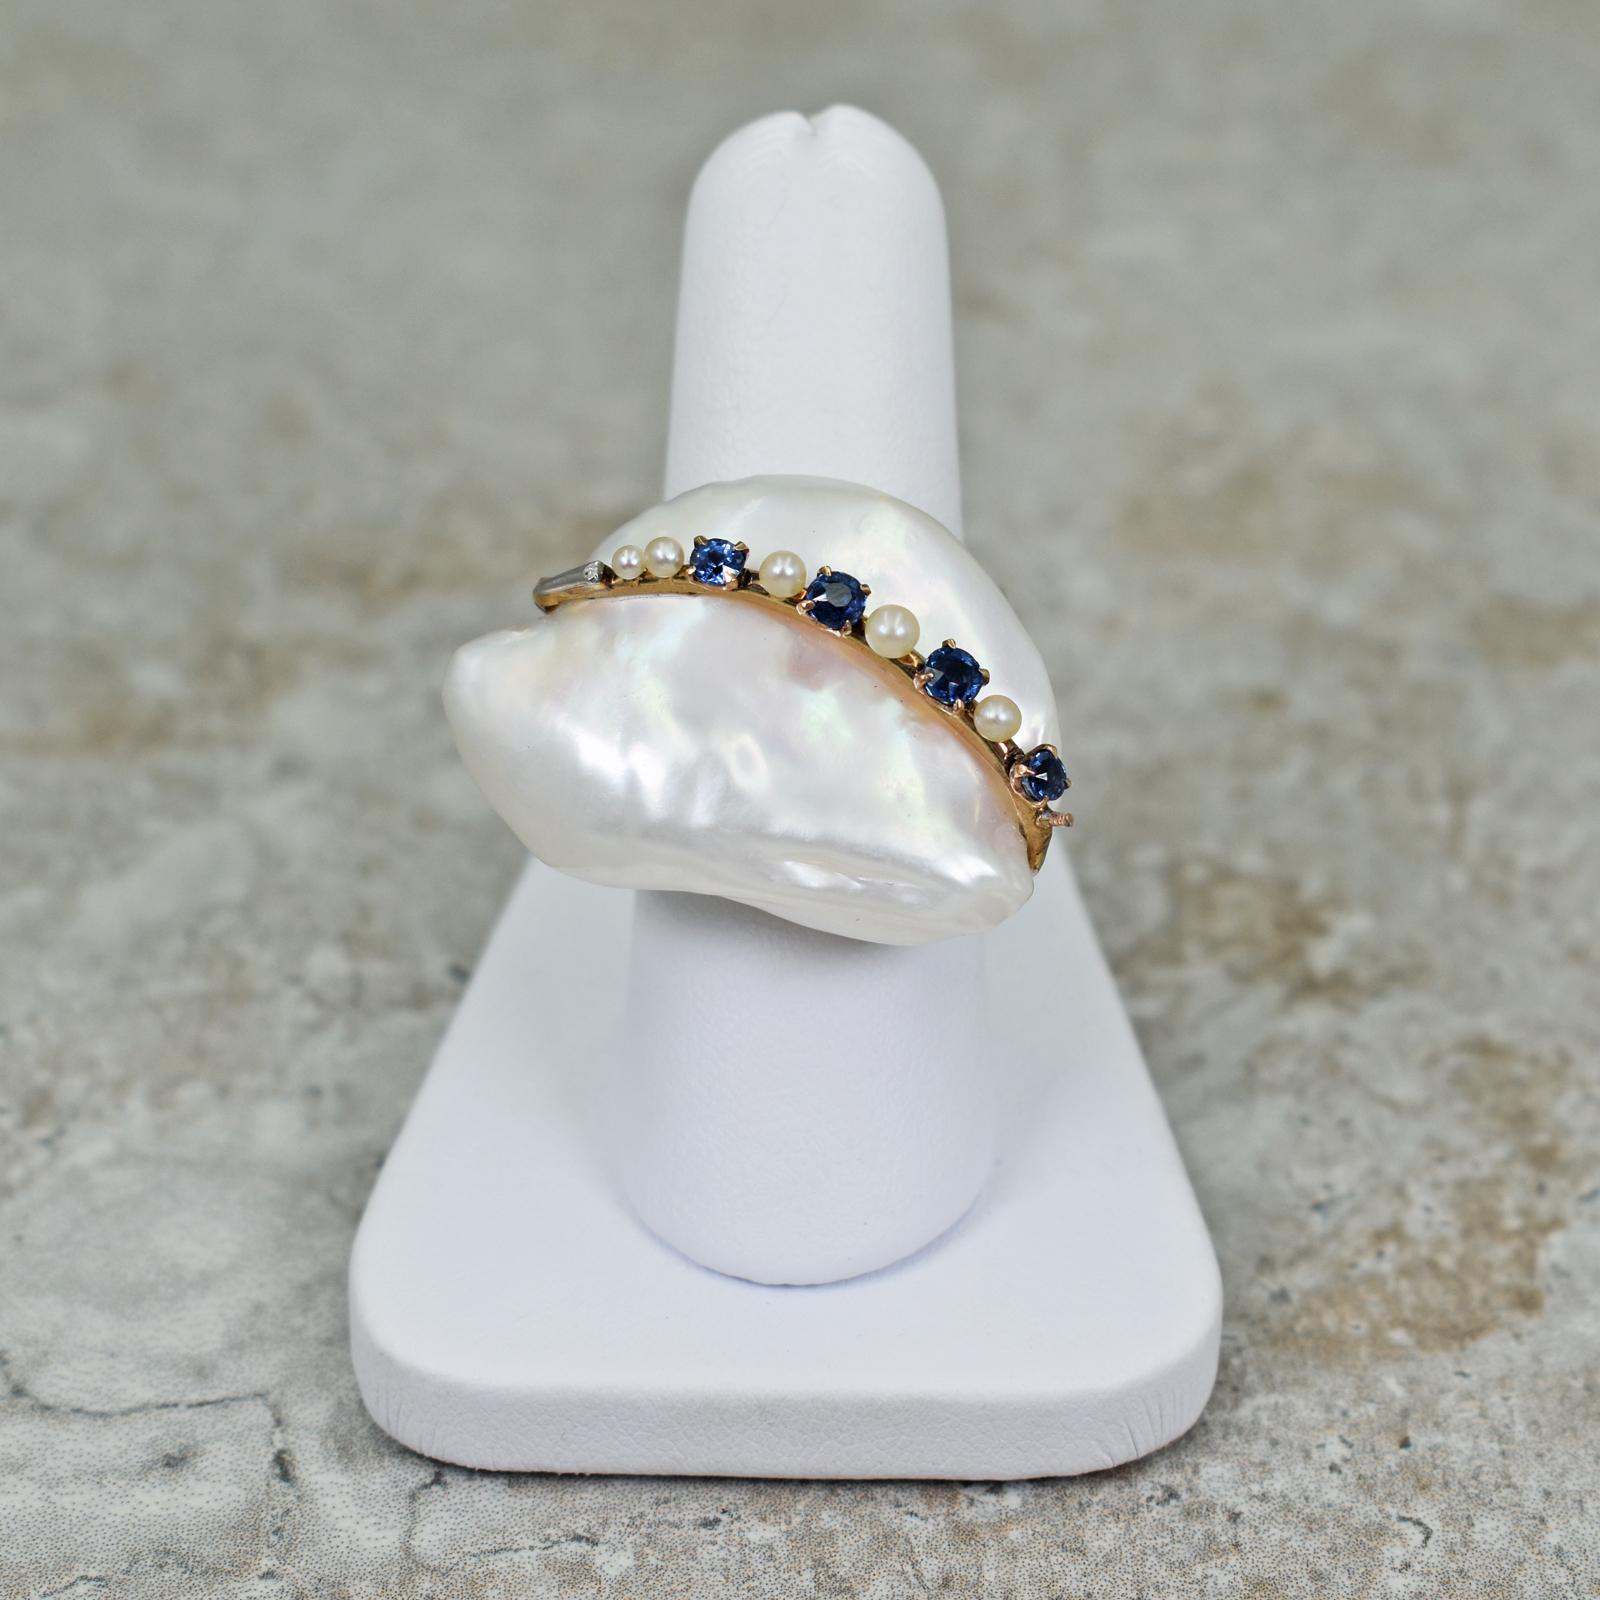 Women's Baroque Pearl, Blue Sapphire & 14k Gold Pendant Necklace and Cocktail Ring Set For Sale